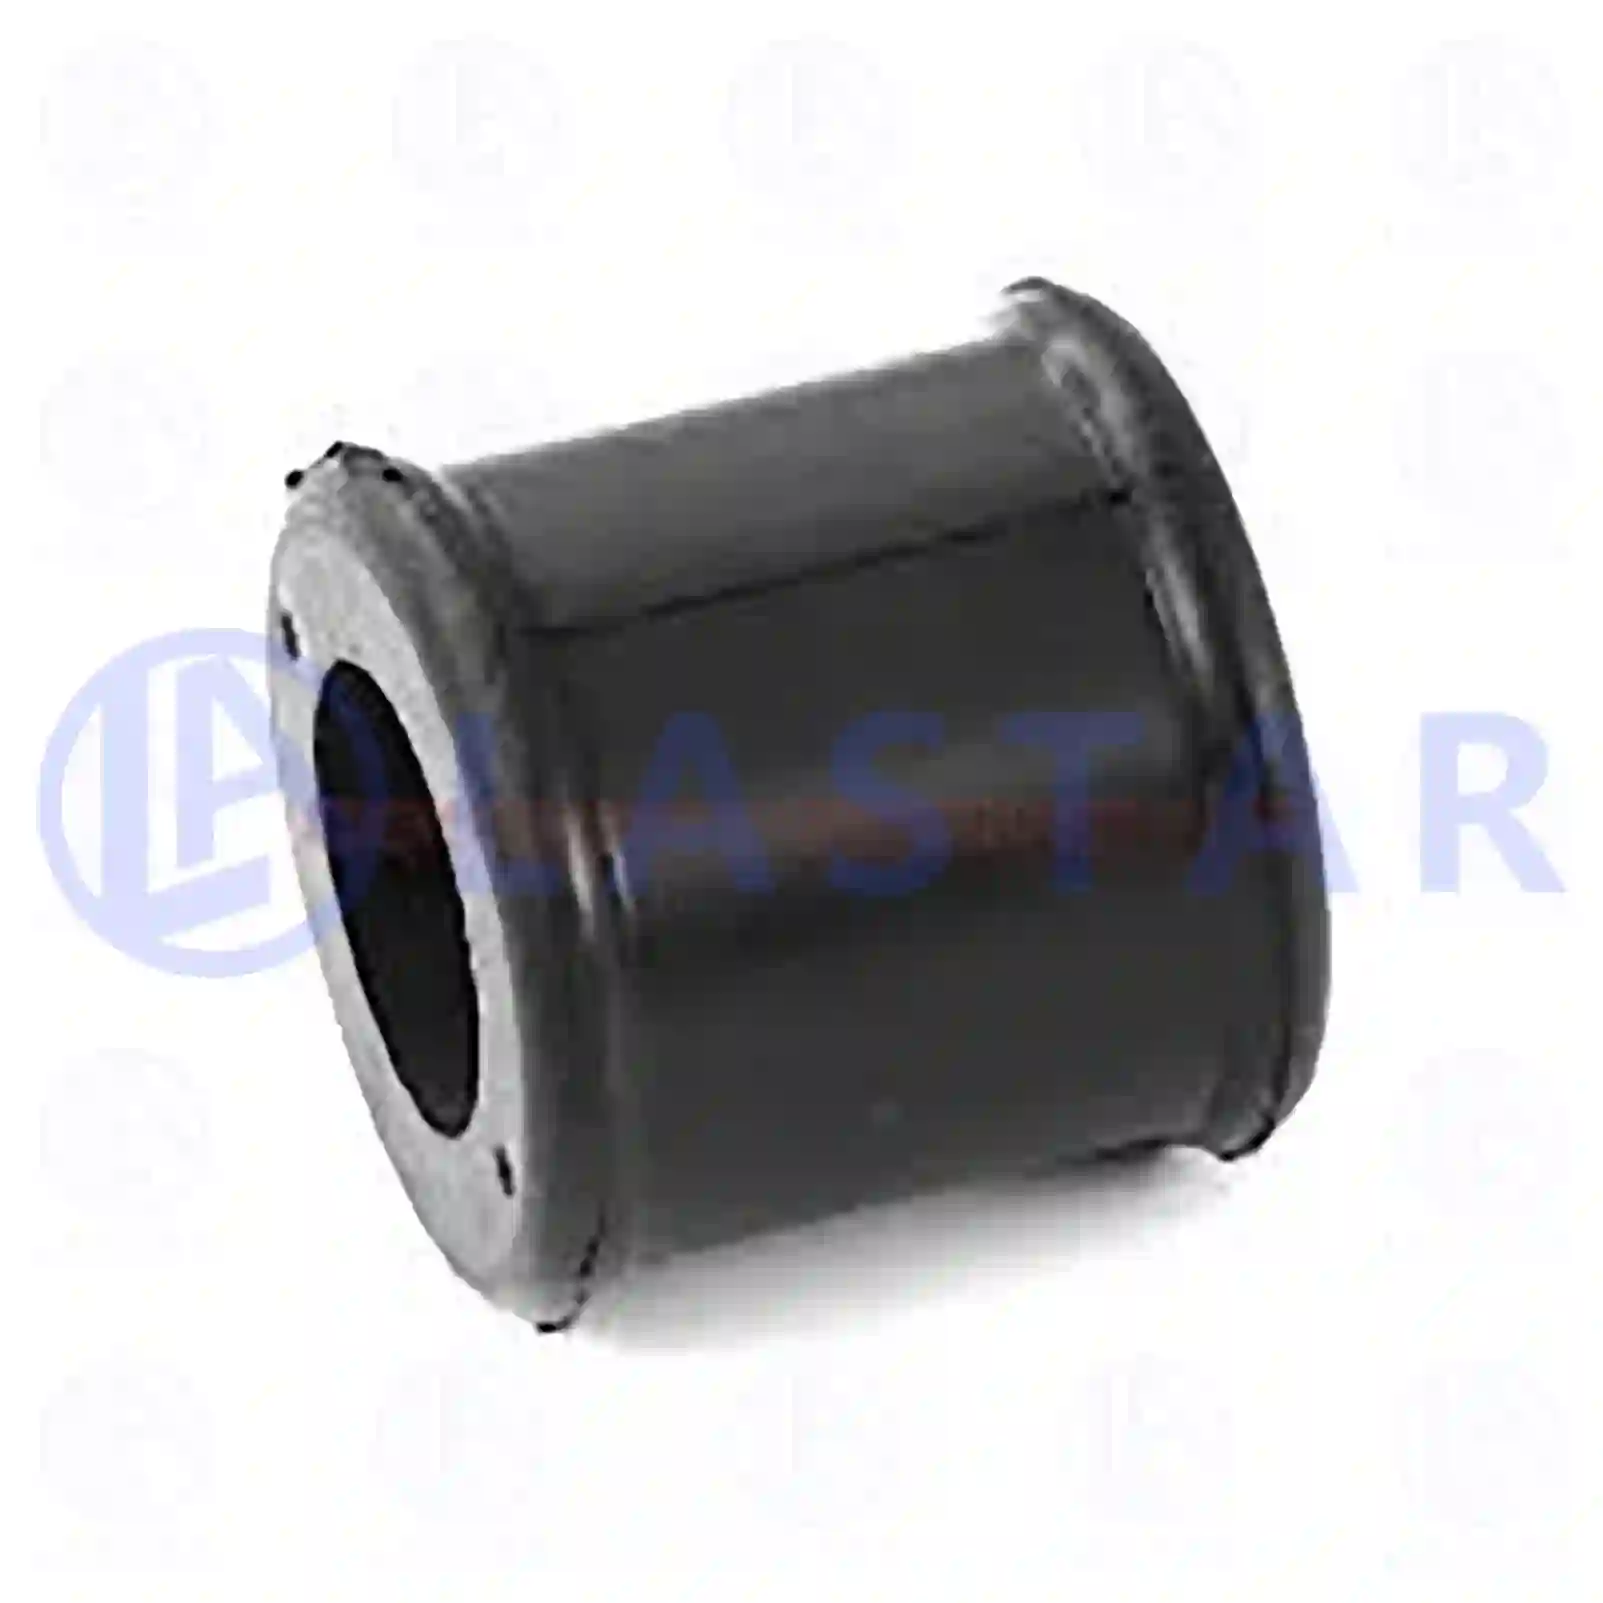 Rubber bushing, shock absorber, 77728576, 0698429, 698429, 93159597, 1698046 ||  77728576 Lastar Spare Part | Truck Spare Parts, Auotomotive Spare Parts Rubber bushing, shock absorber, 77728576, 0698429, 698429, 93159597, 1698046 ||  77728576 Lastar Spare Part | Truck Spare Parts, Auotomotive Spare Parts